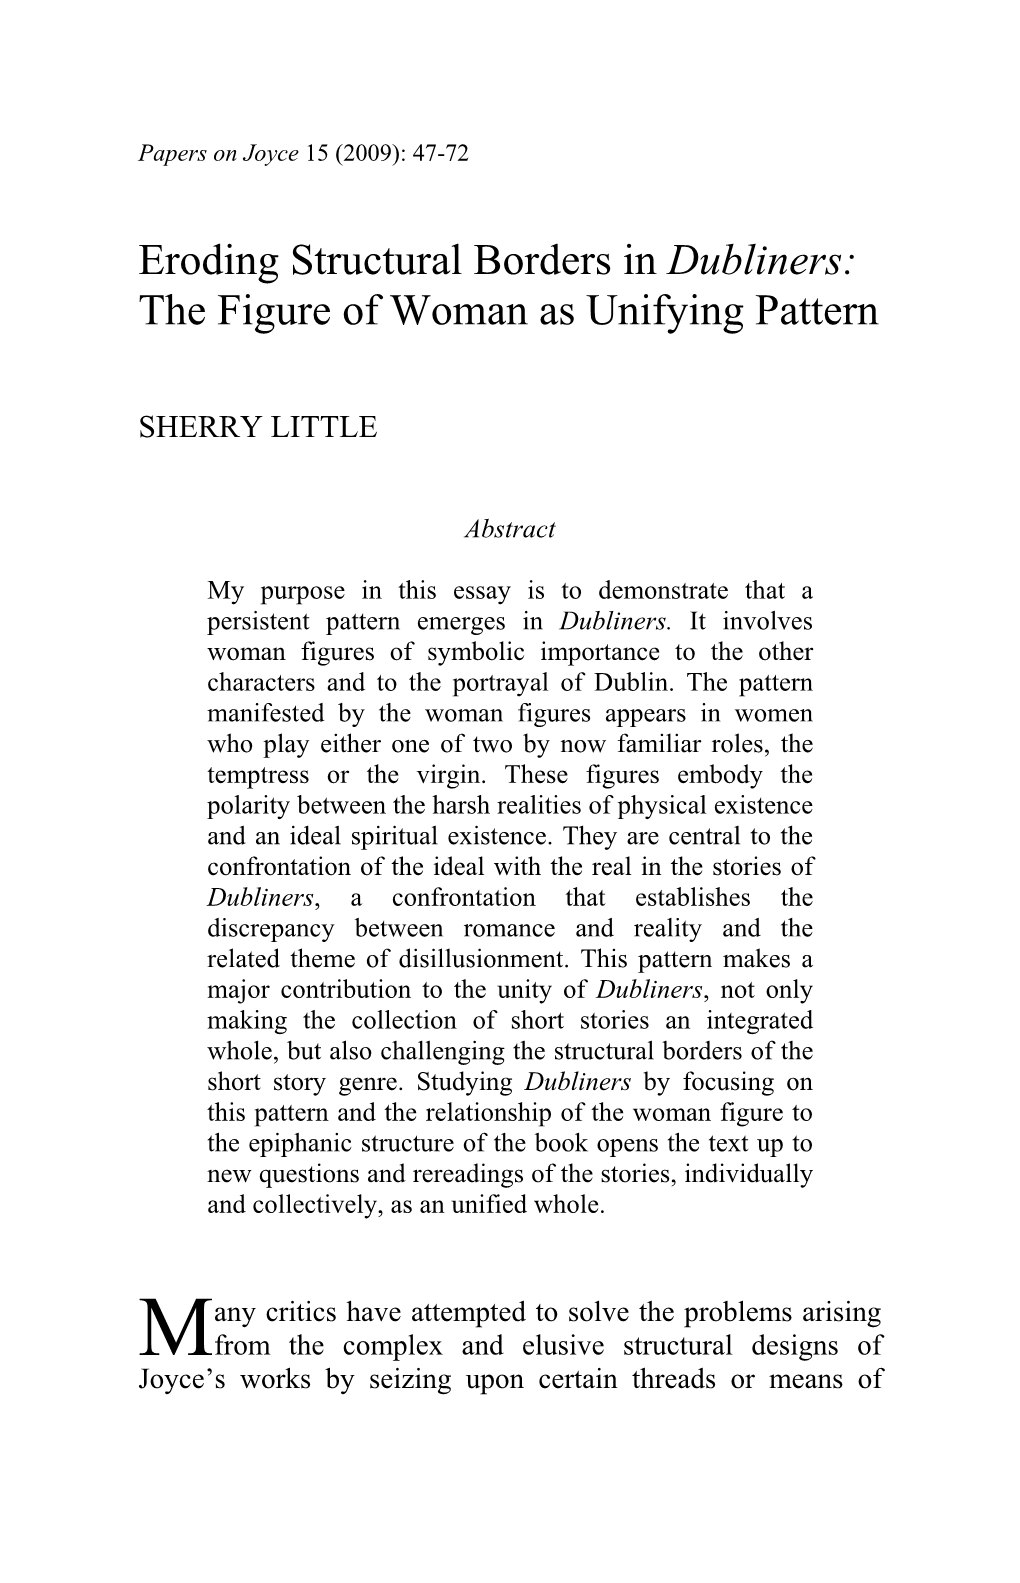 Eroding Structural Borders in Dubliners: the Figure of Woman As Unifying Pattern